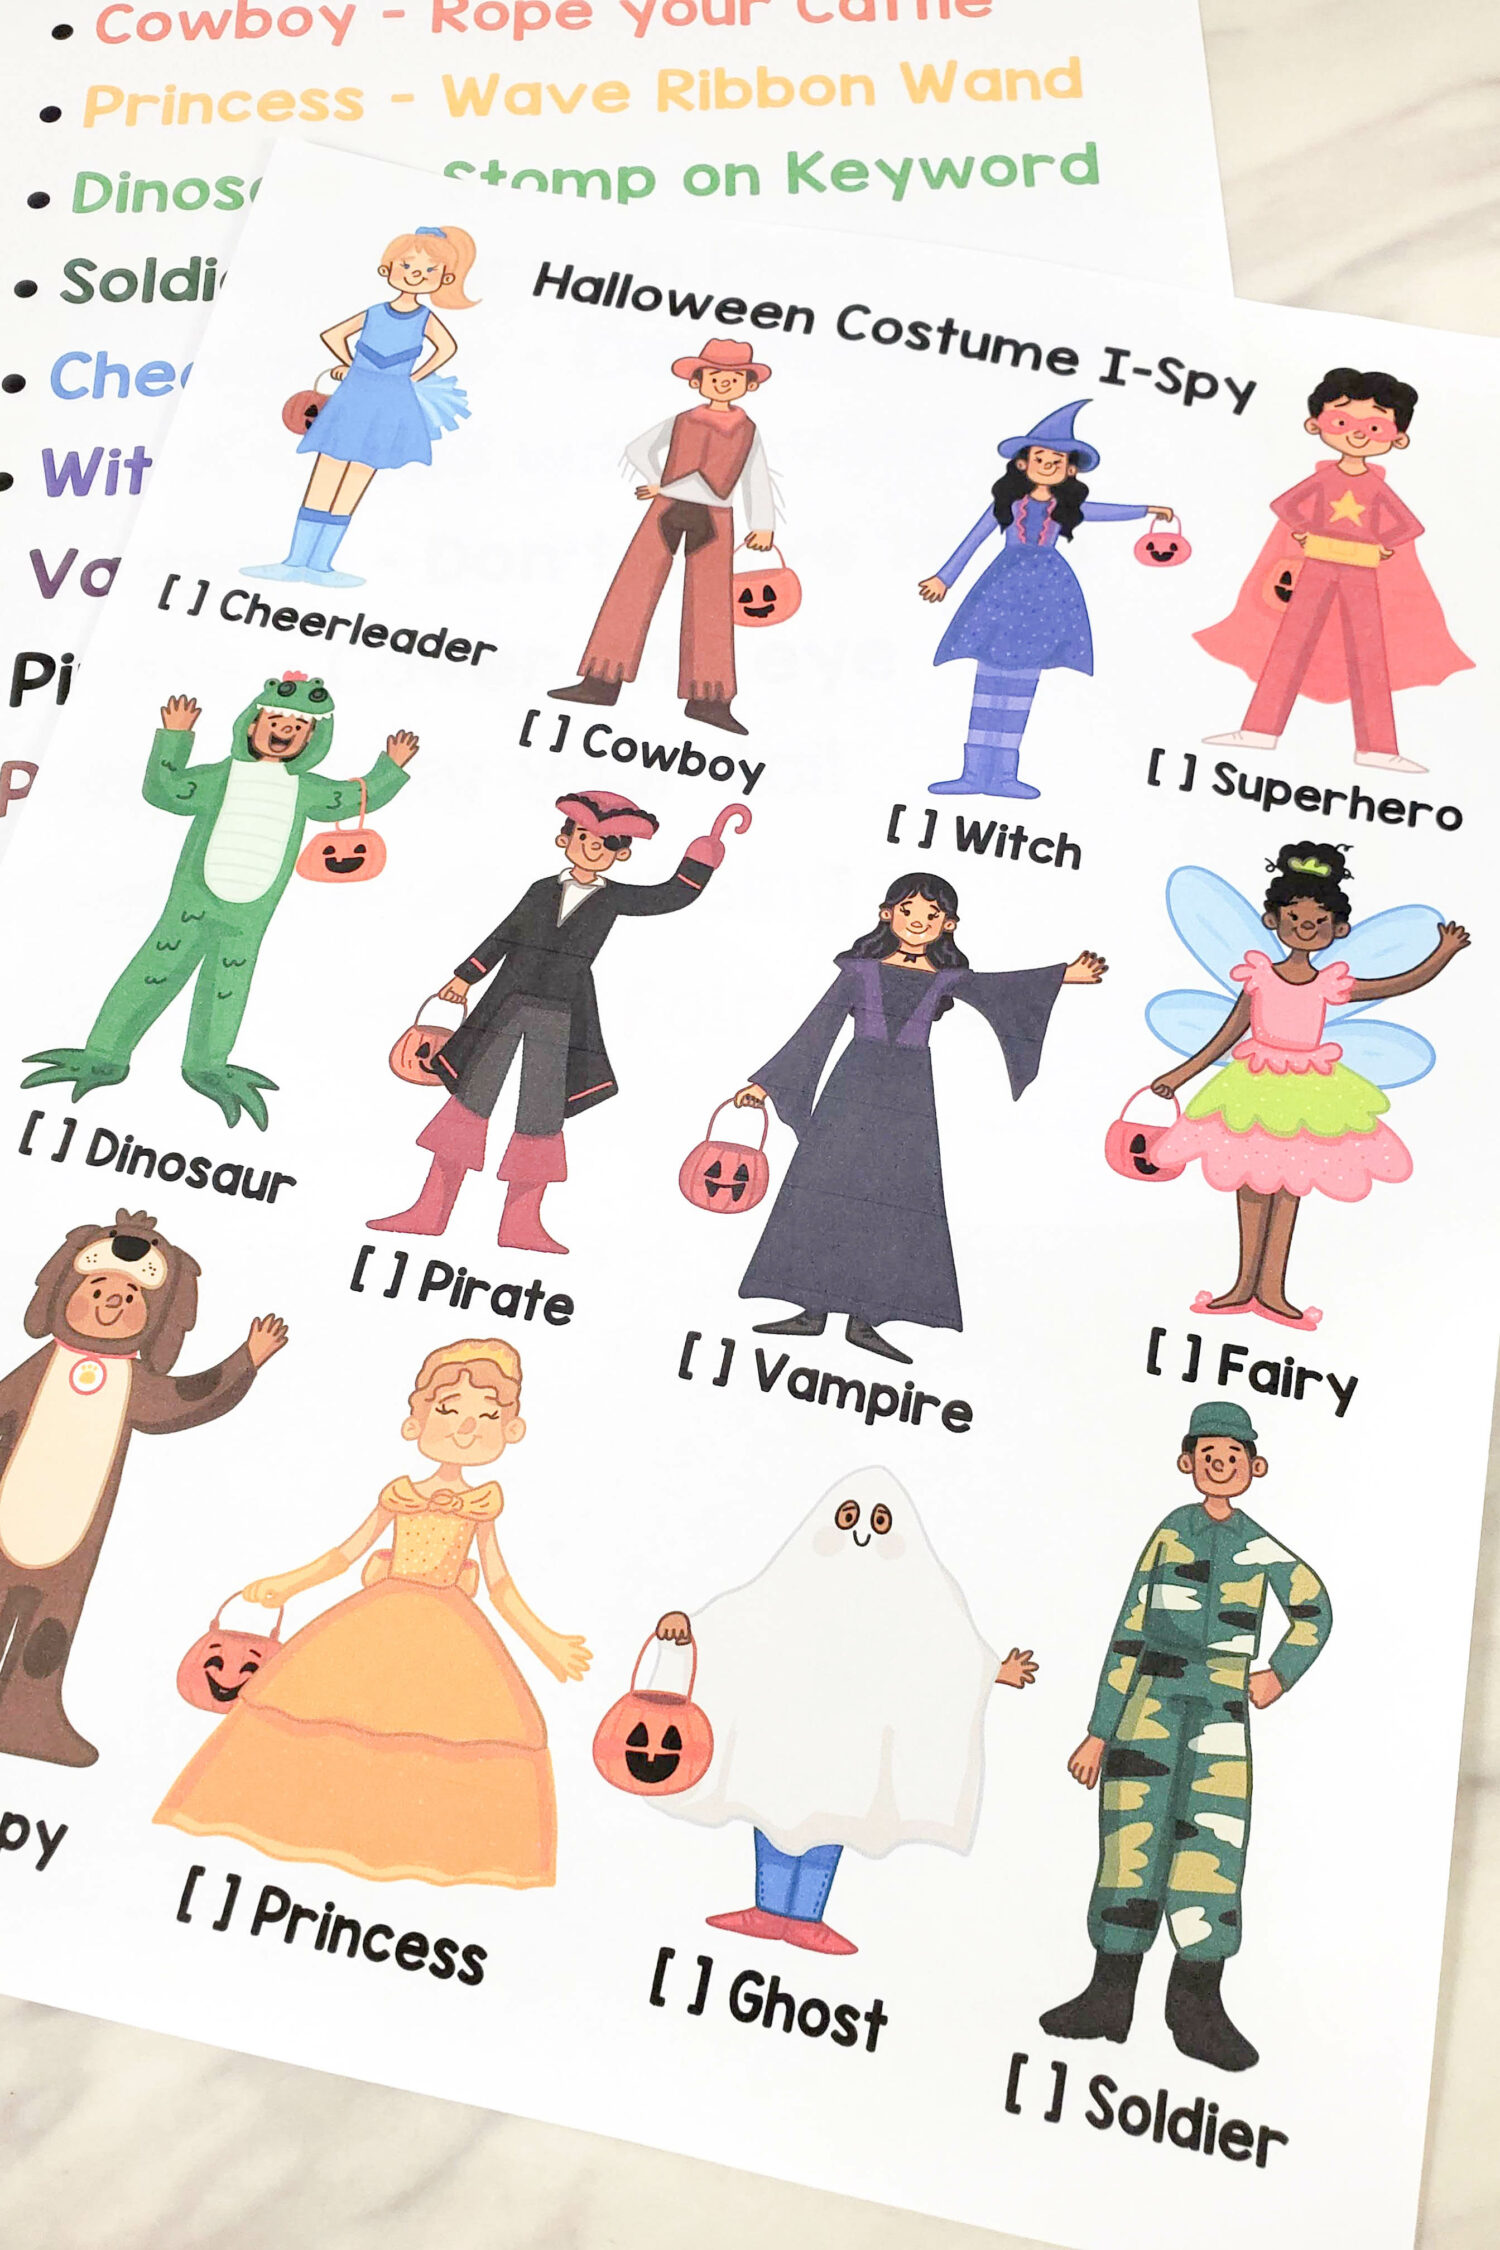 Halloween Costumes I Spy printable kids activity and game